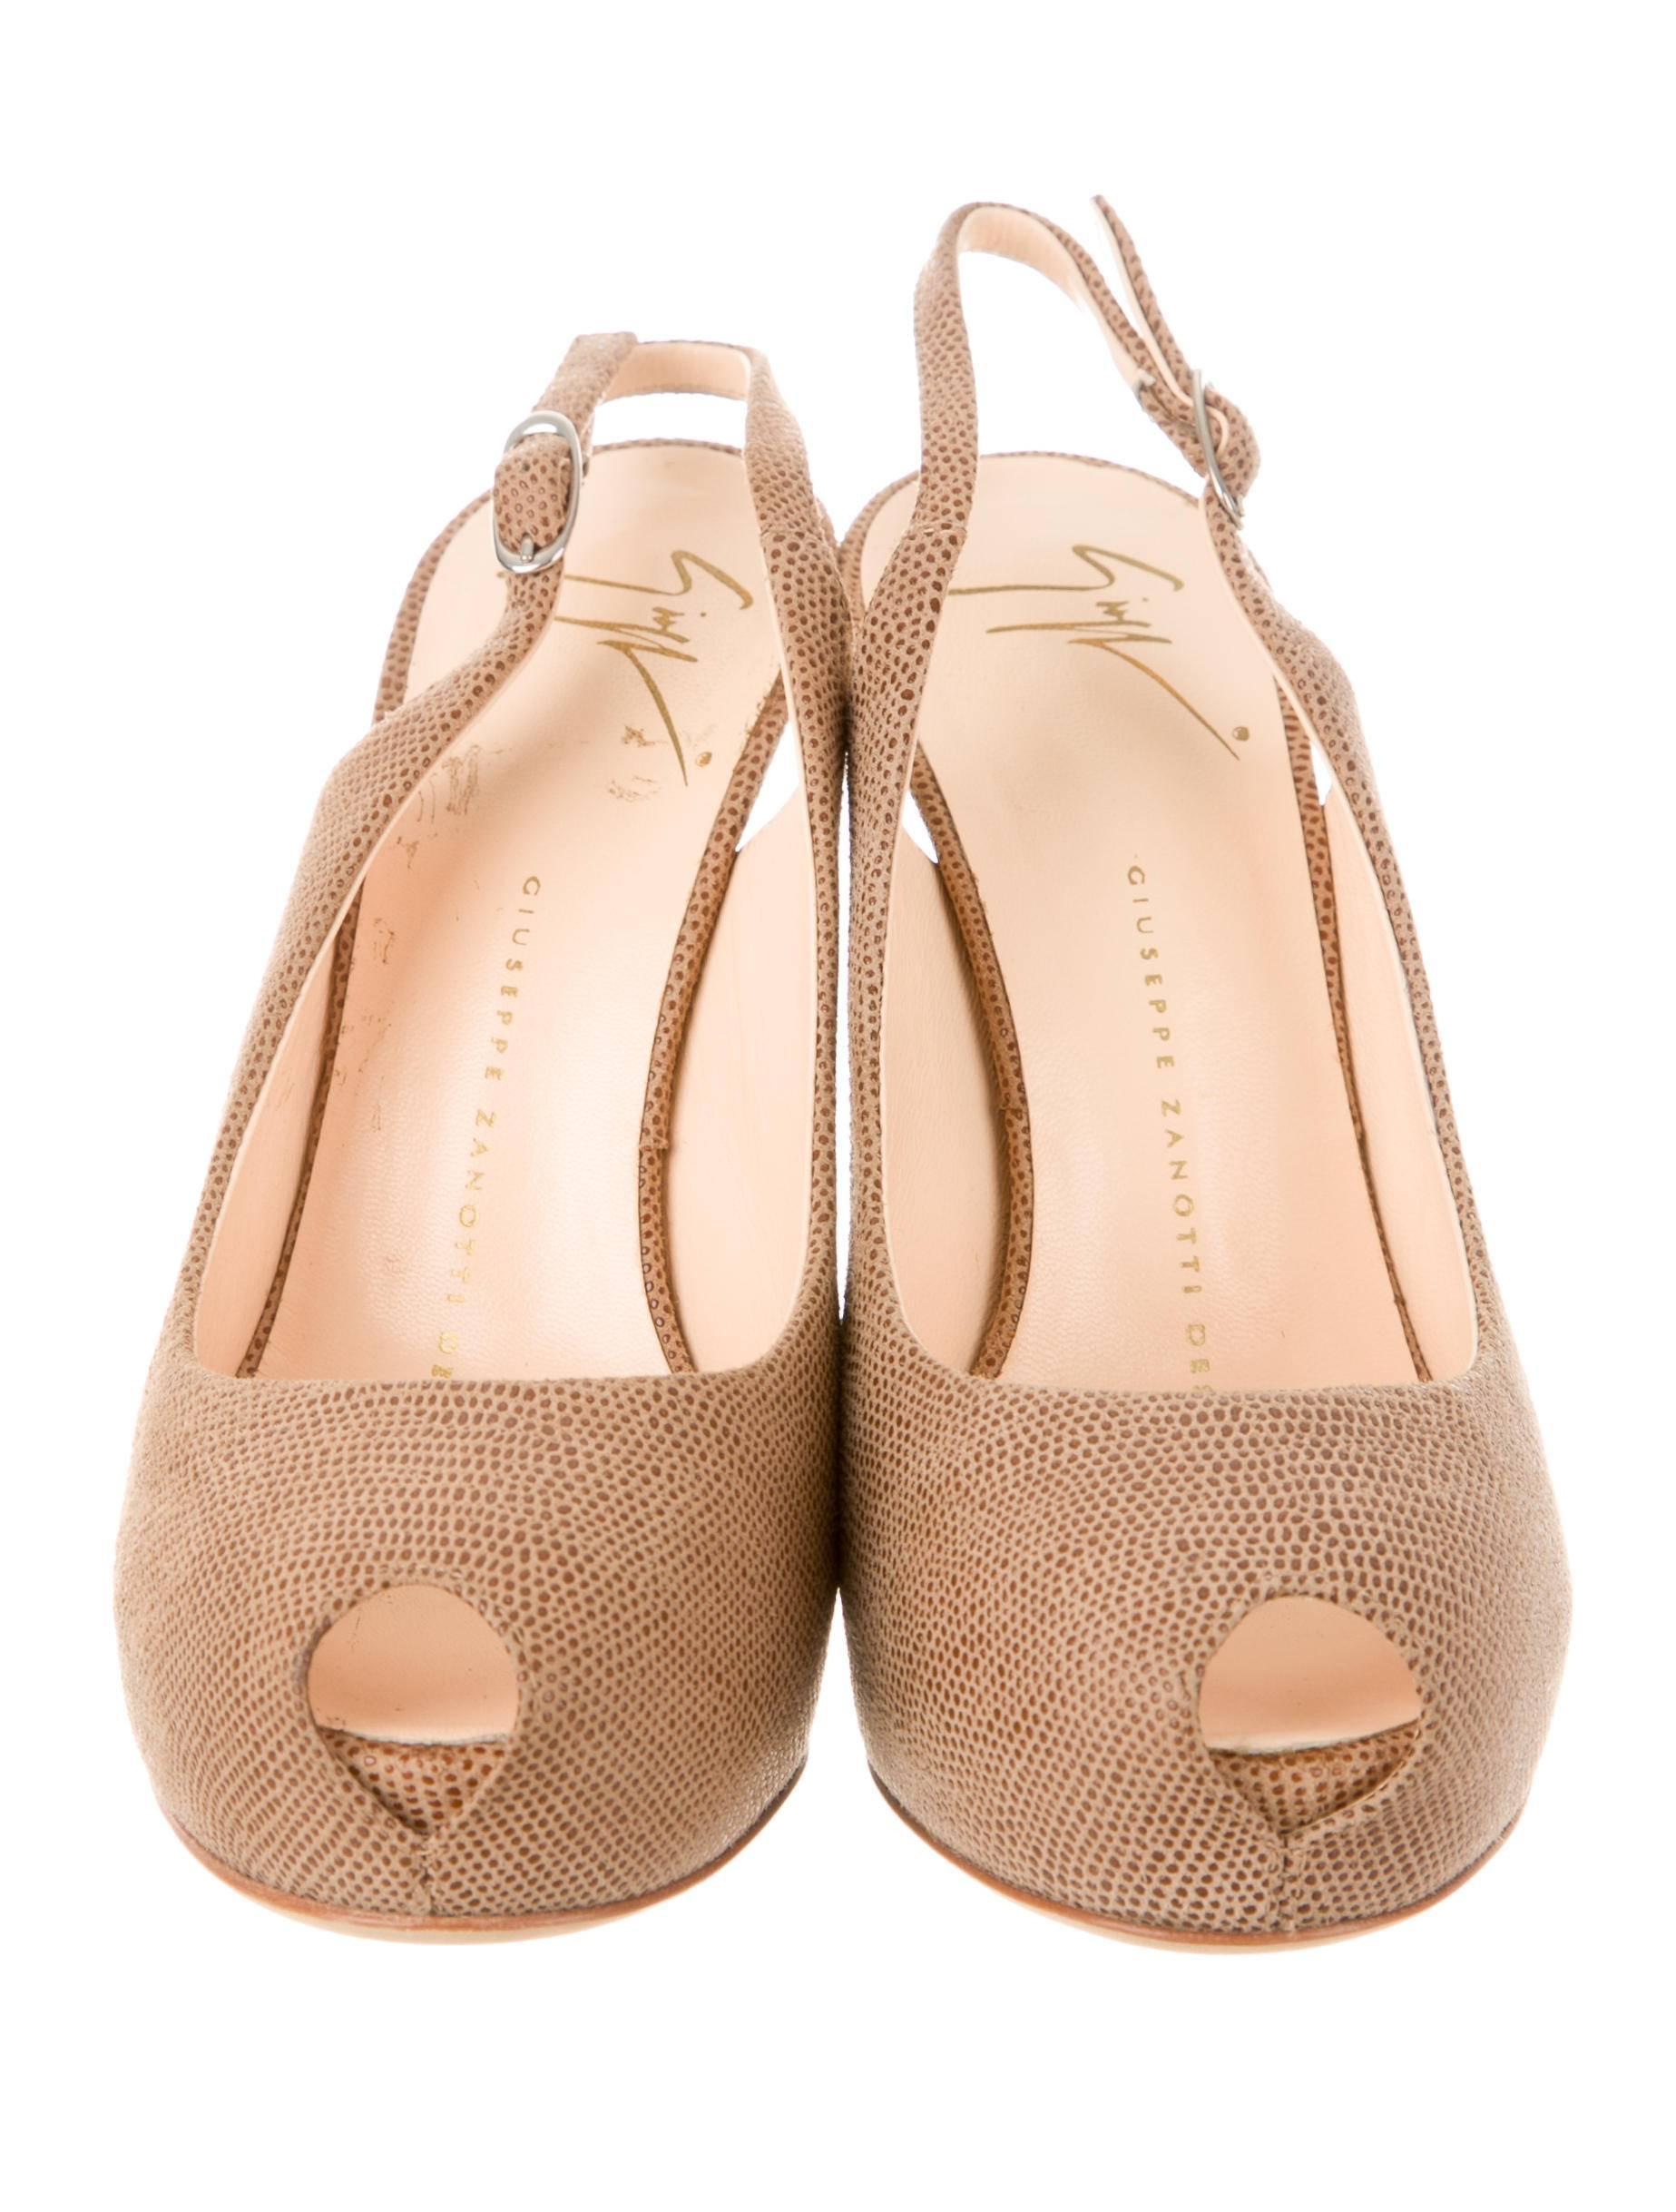 Brown Giuseppe Zanotti NEW & SOLD OUT Cognac Nude Texture Suede Sandals Pumps in Box